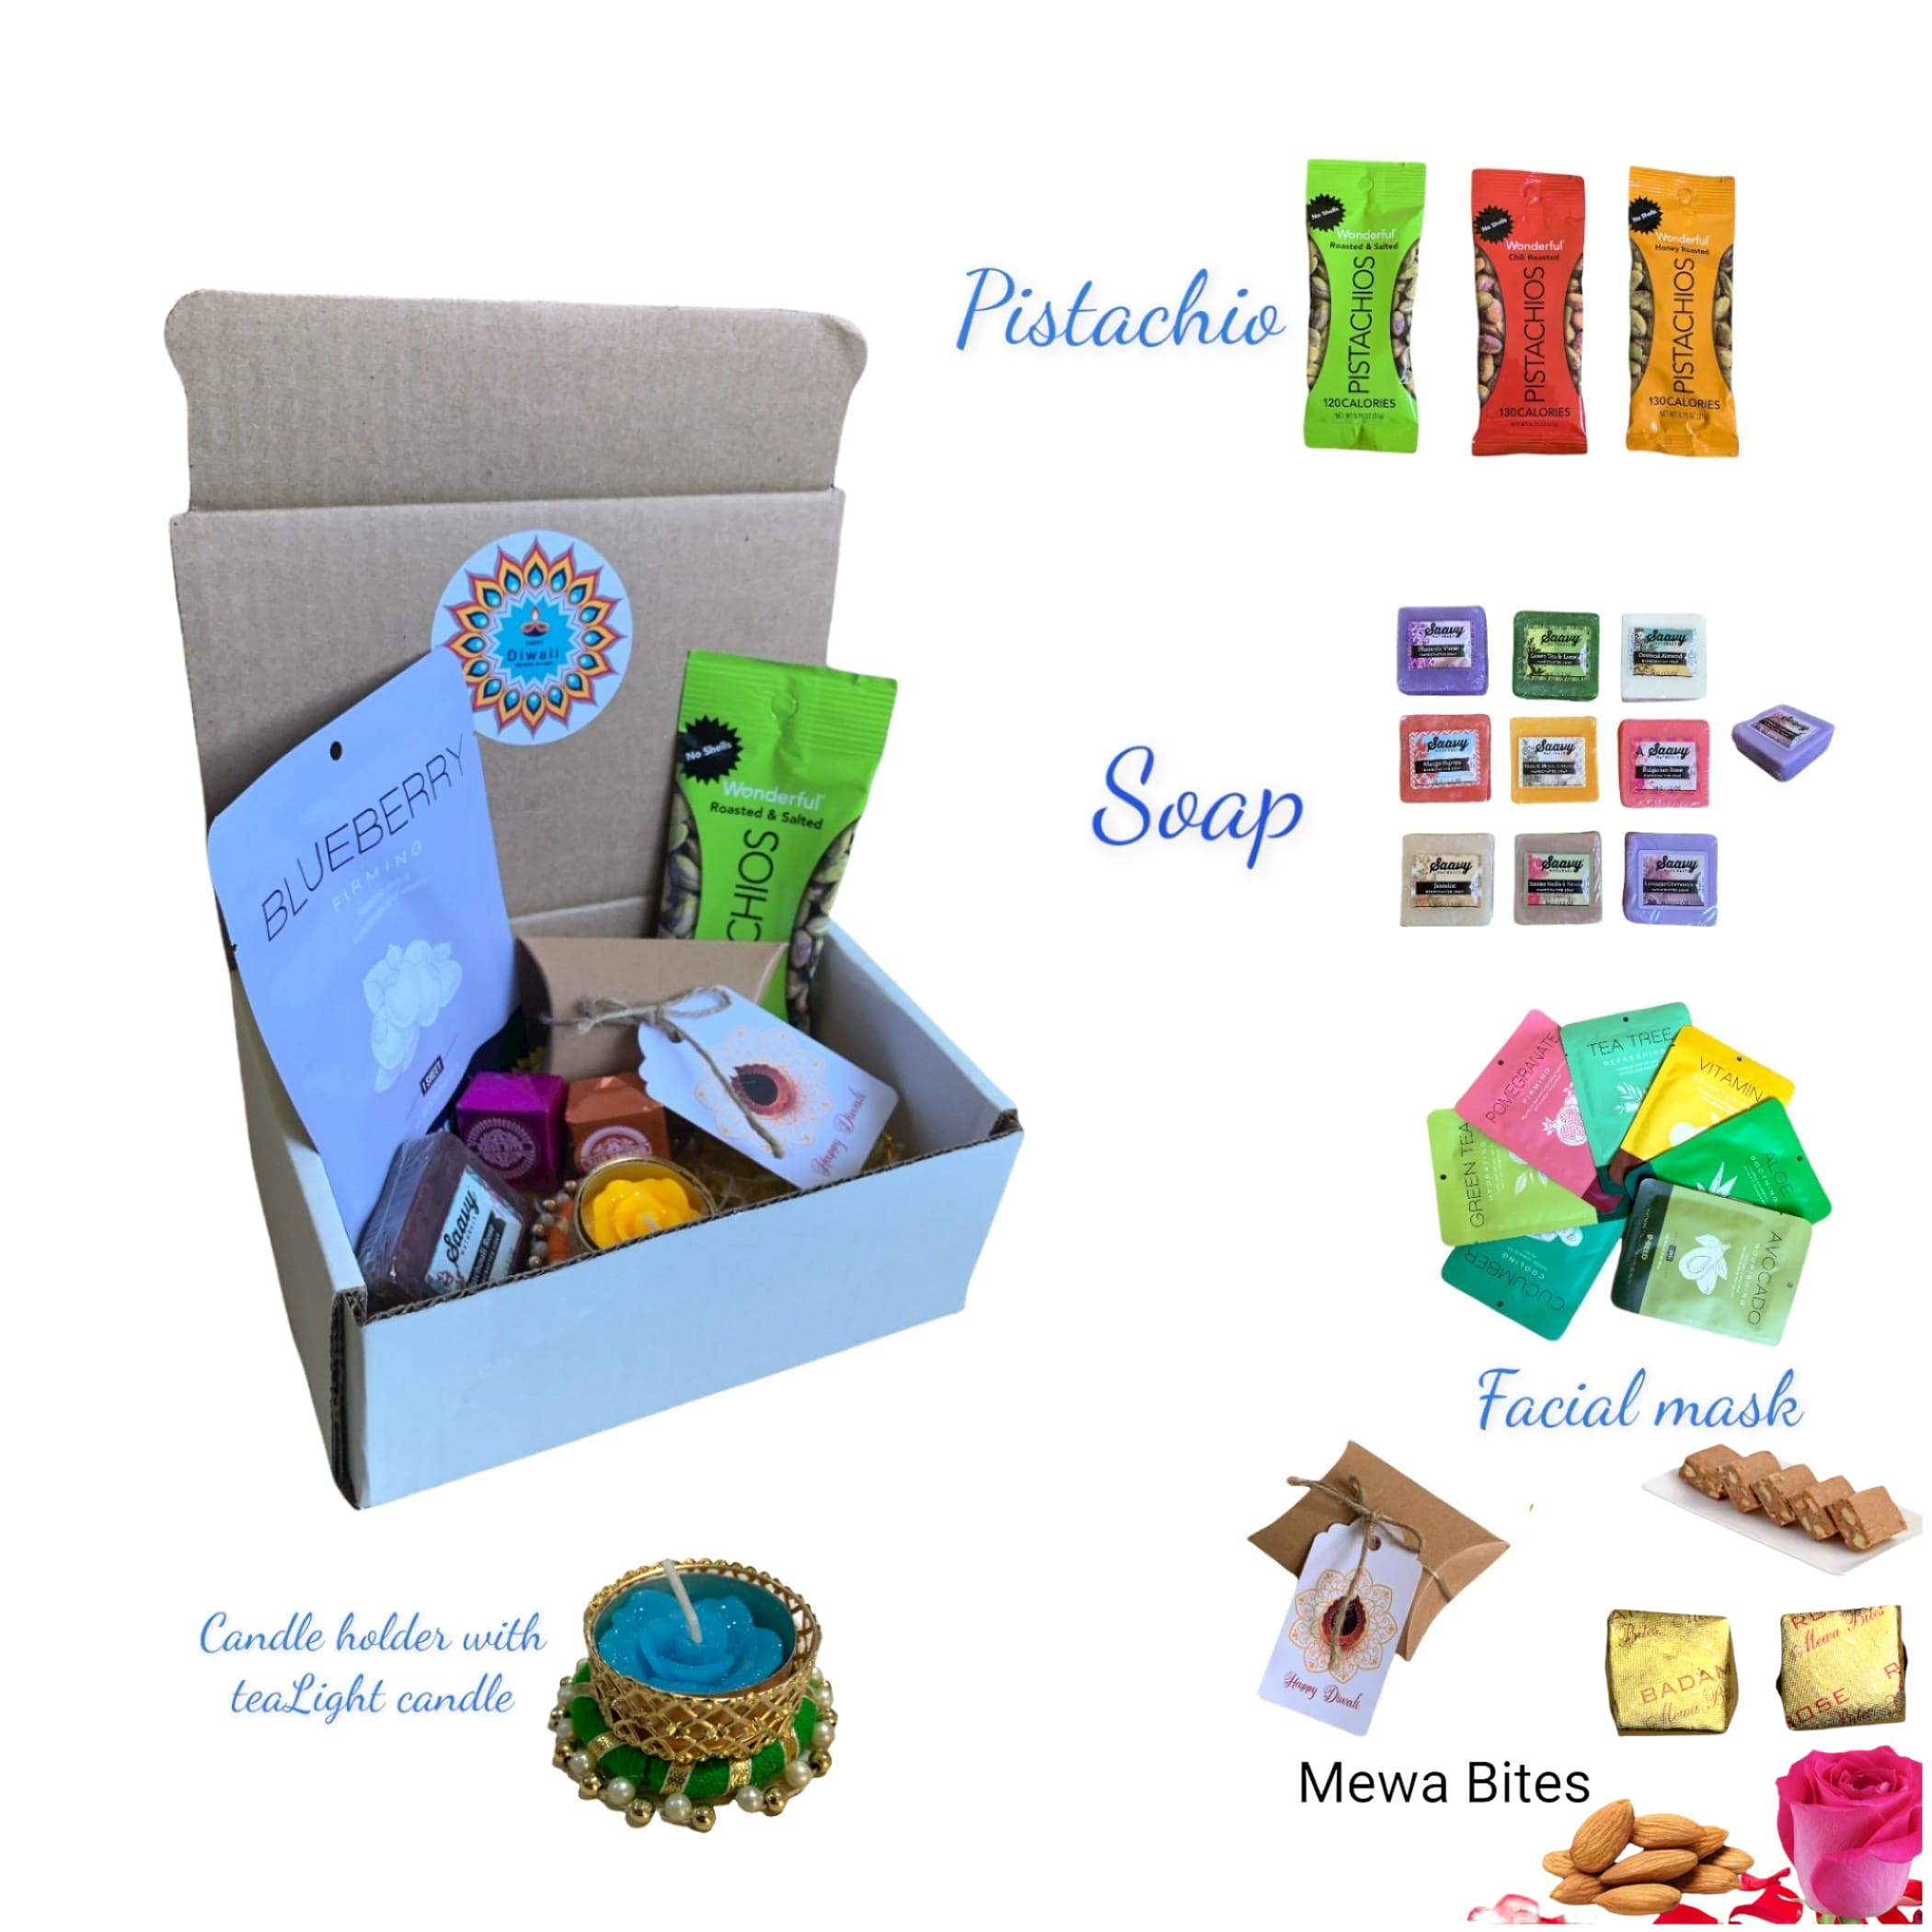 Personalized diwali gifts hamper for her indian gift boxes